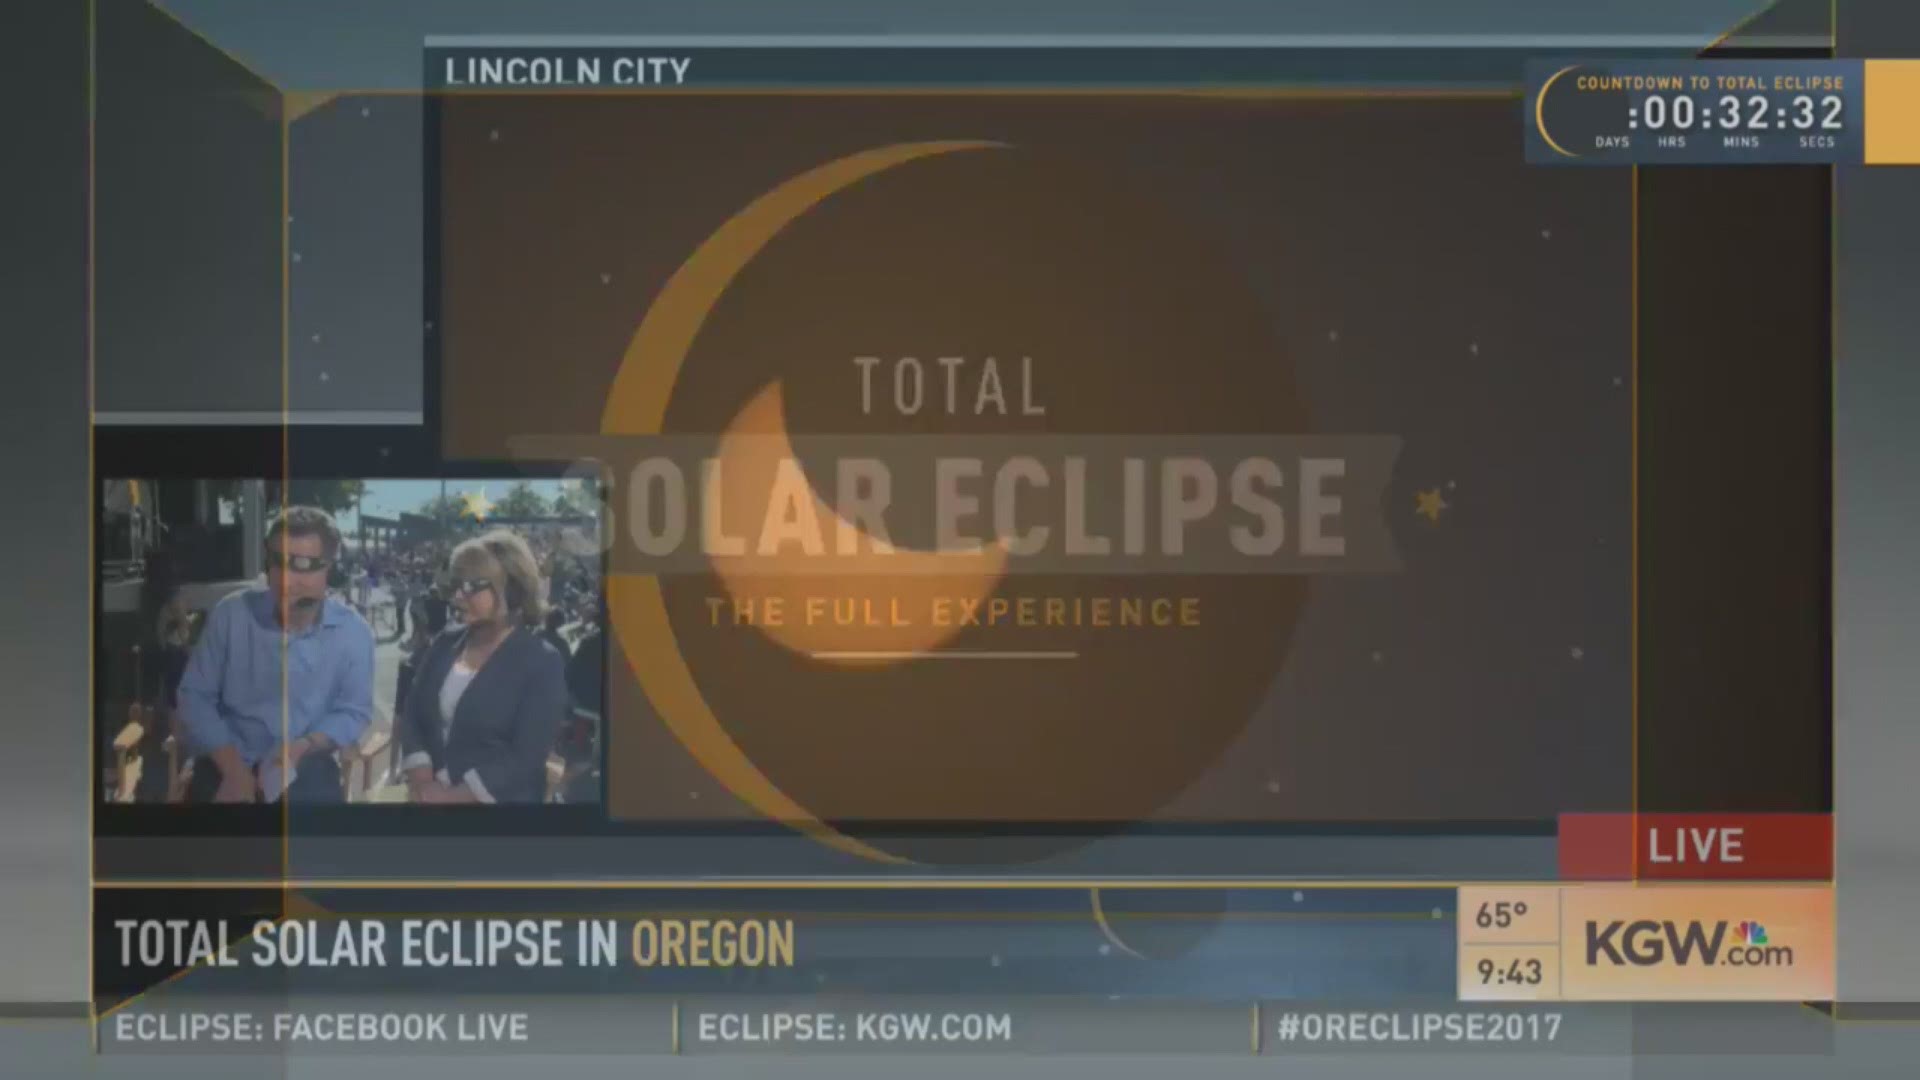 KGW's live coverage of the Great American Eclipse in Oregon on Aug. 21, 2017.